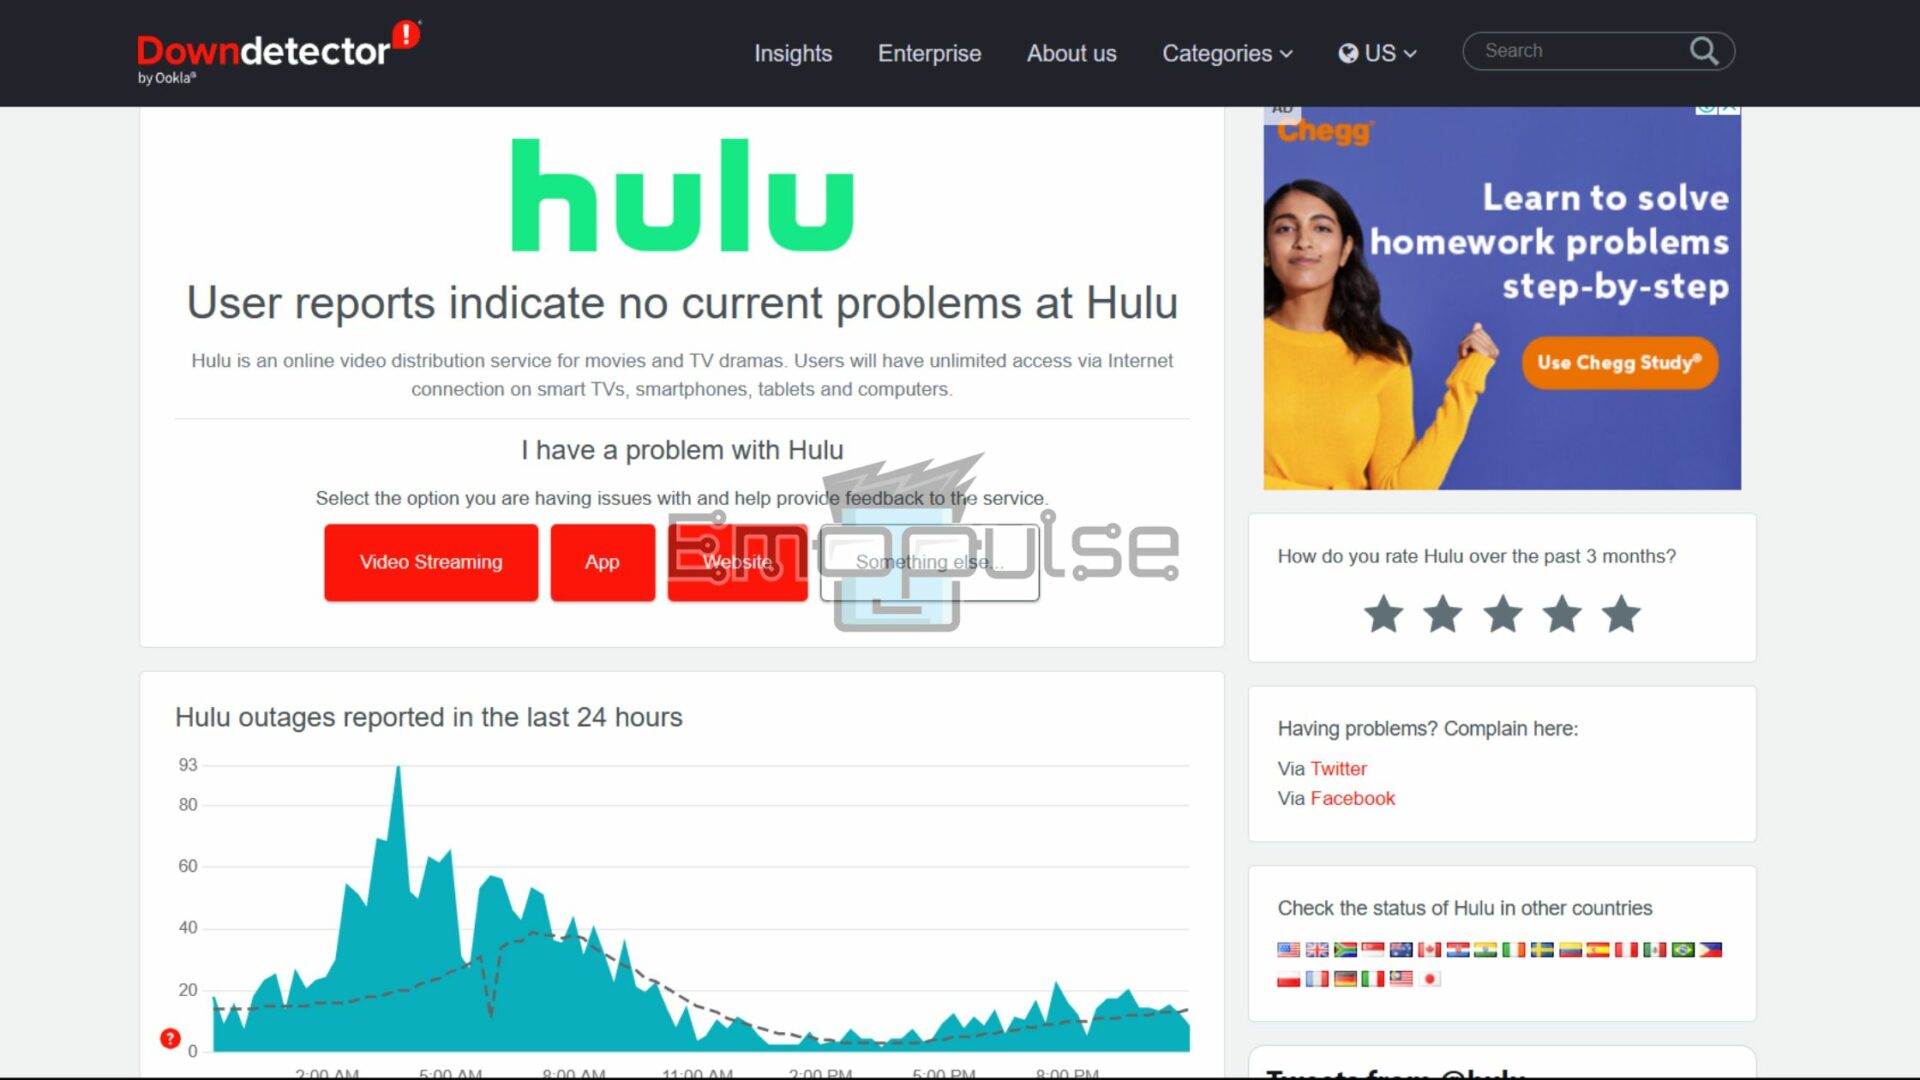 Down Detector web page showing outages in Hulu service in last 24 hours